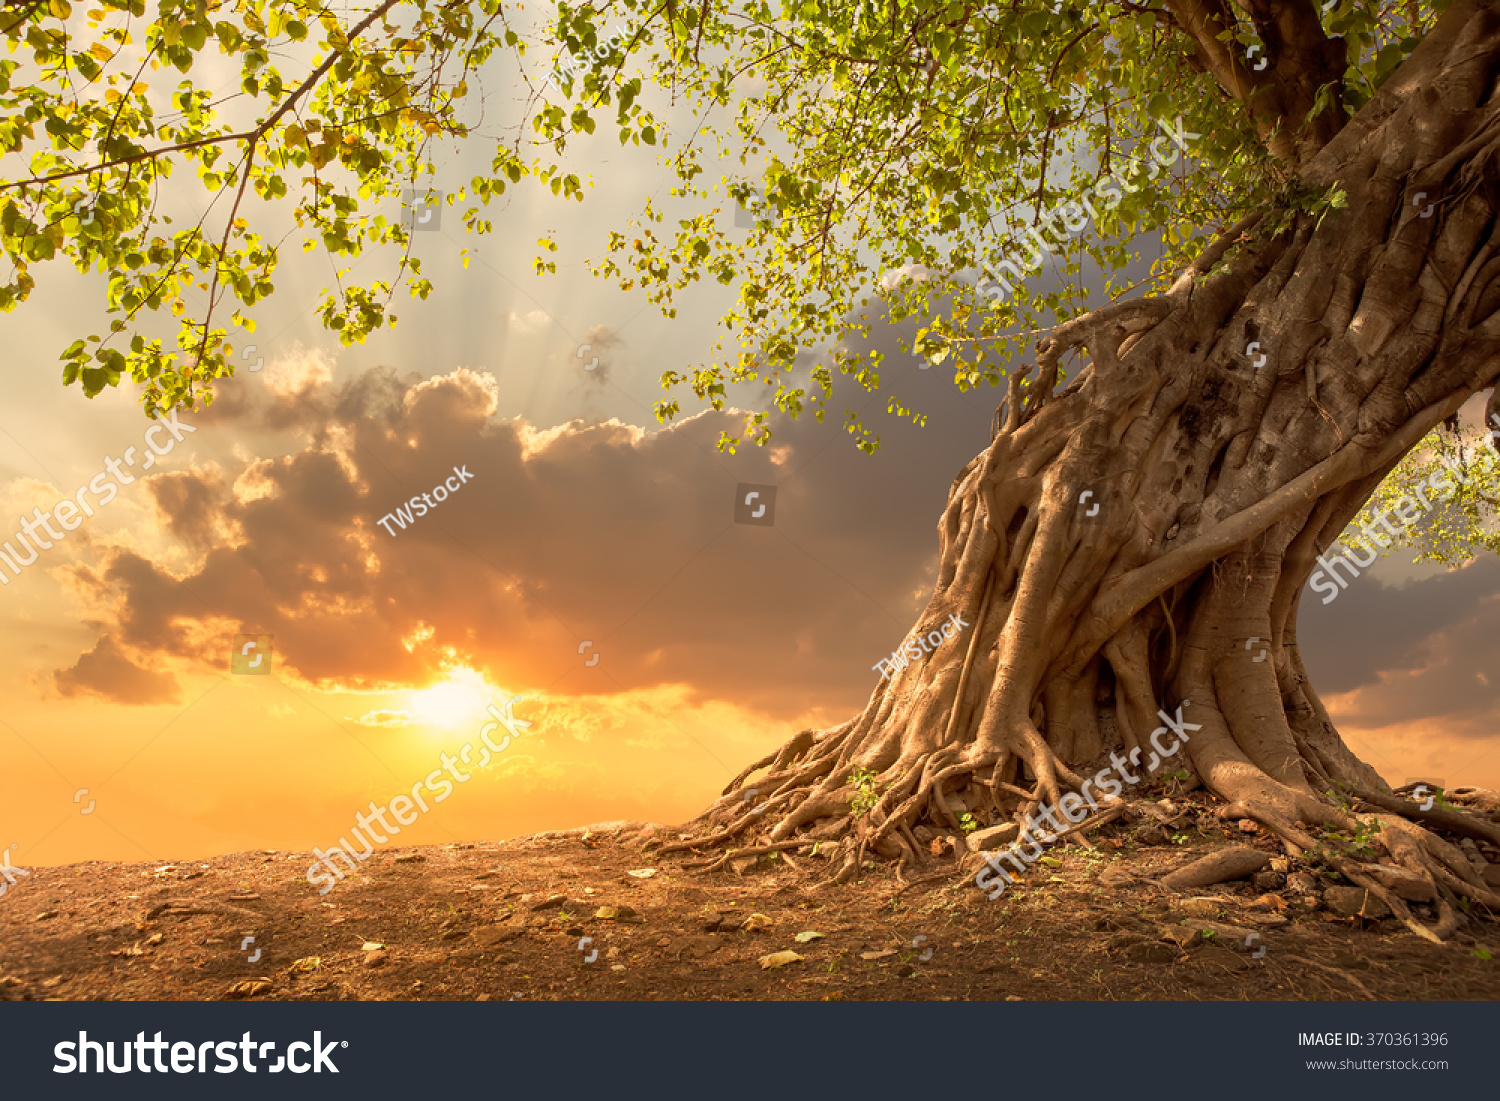 Beautiful scence of big tree with leaves at sunset sky with clouds. Fantasy landscape with free copy space. Using for background of website banner, amazing postcard. Travel concept background. #370361396